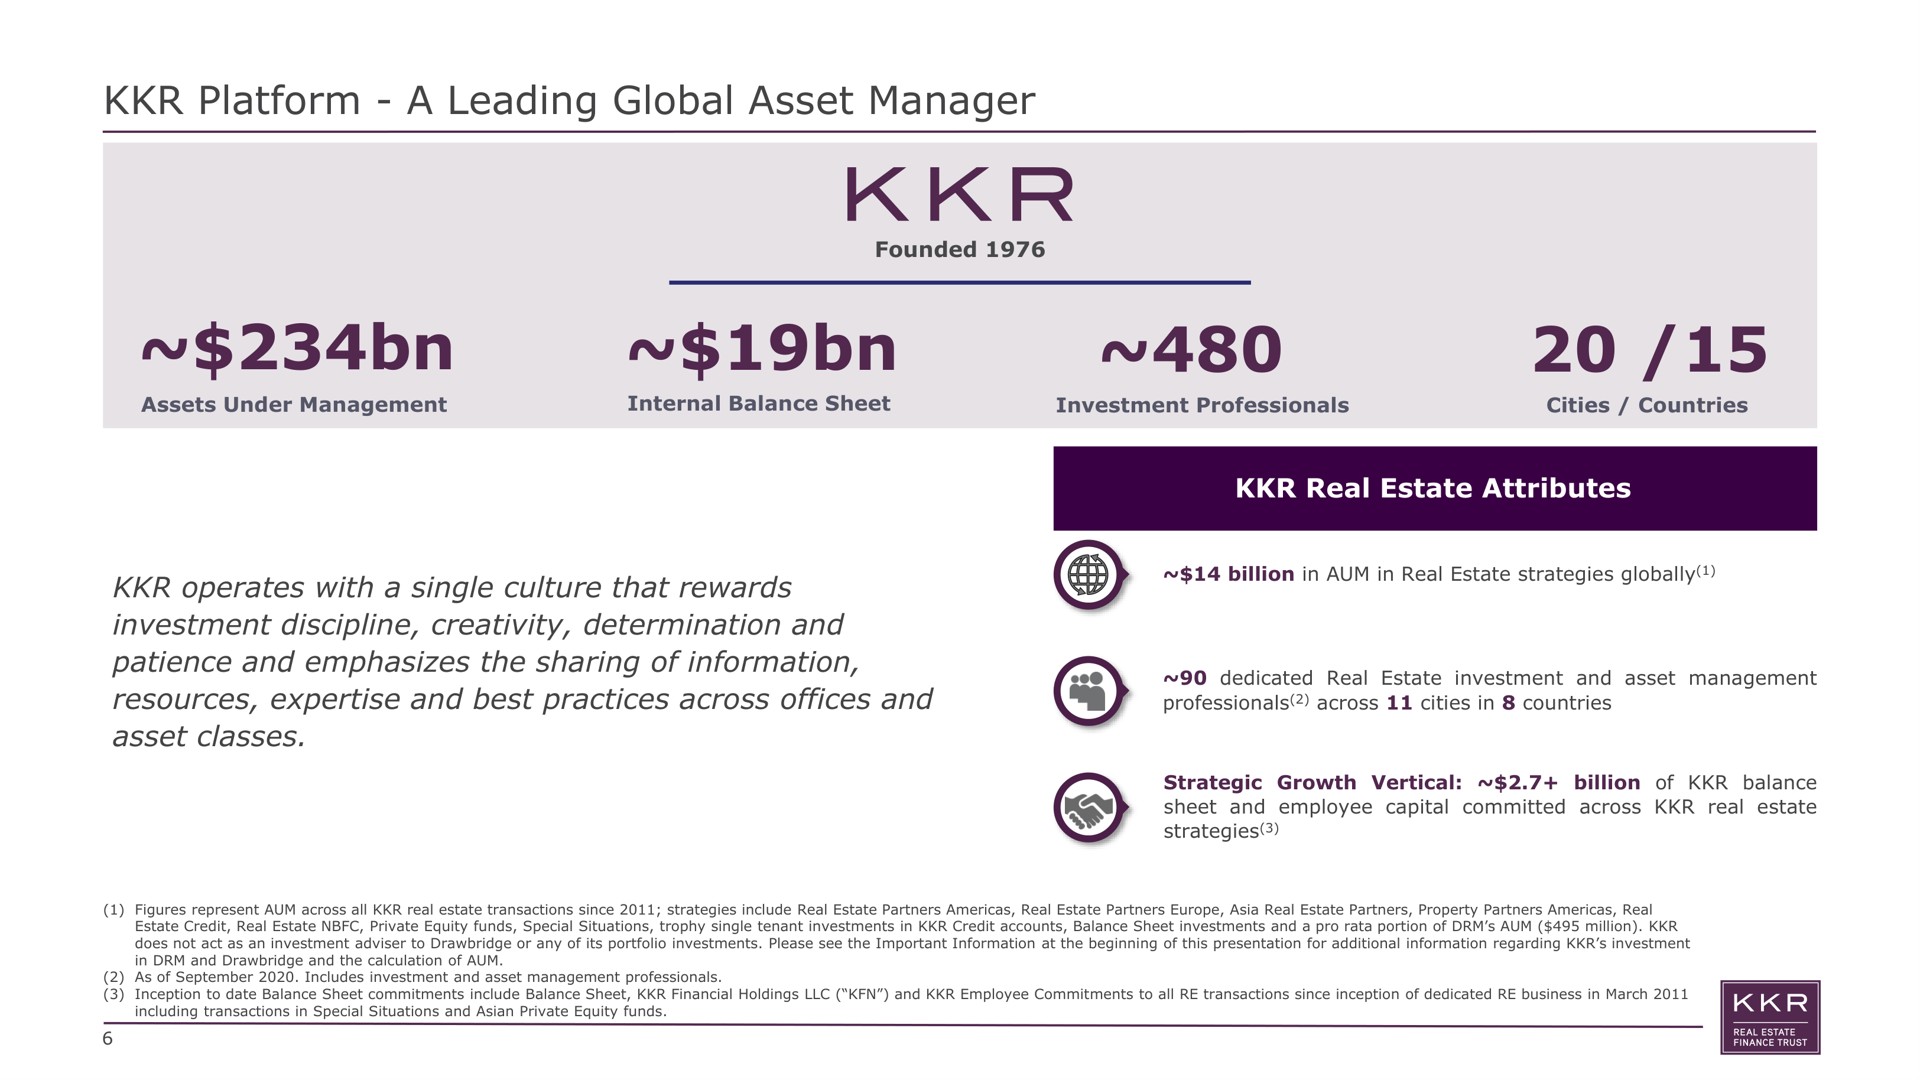 platform a leading global asset manager operates with a single culture that rewards investment discipline creativity determination and patience and emphasizes the sharing of information resources and best practices across offices and asset classes soe pride ally | KKR Real Estate Finance Trust